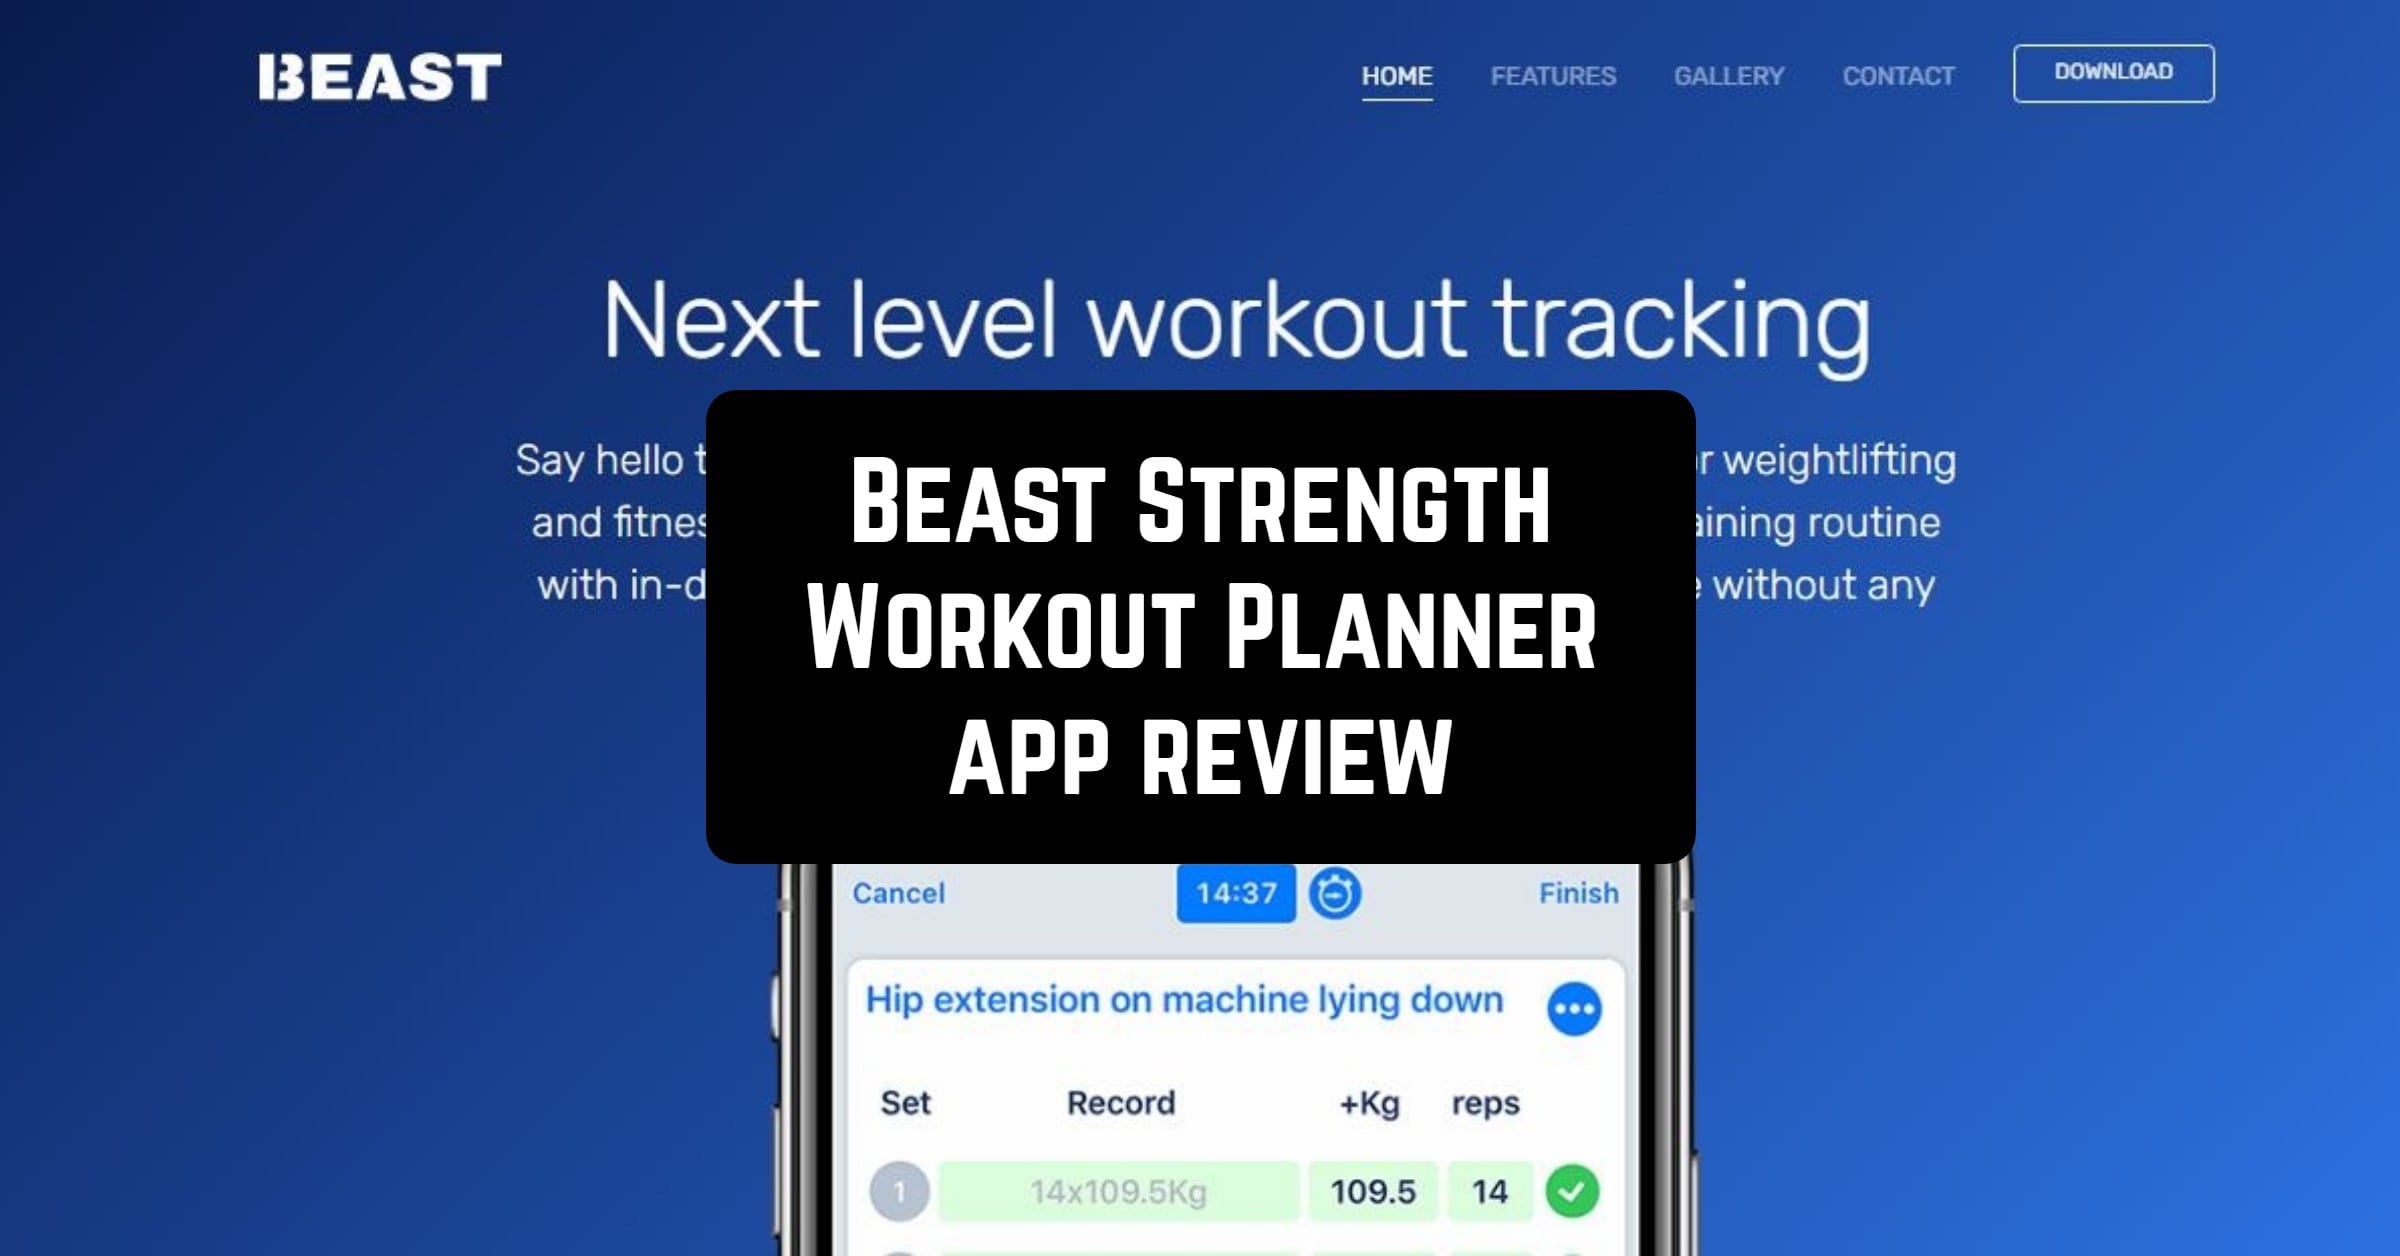 Beast Strength Workout Planner App Review - App pearl - Best mobile apps for Android & iOS devices